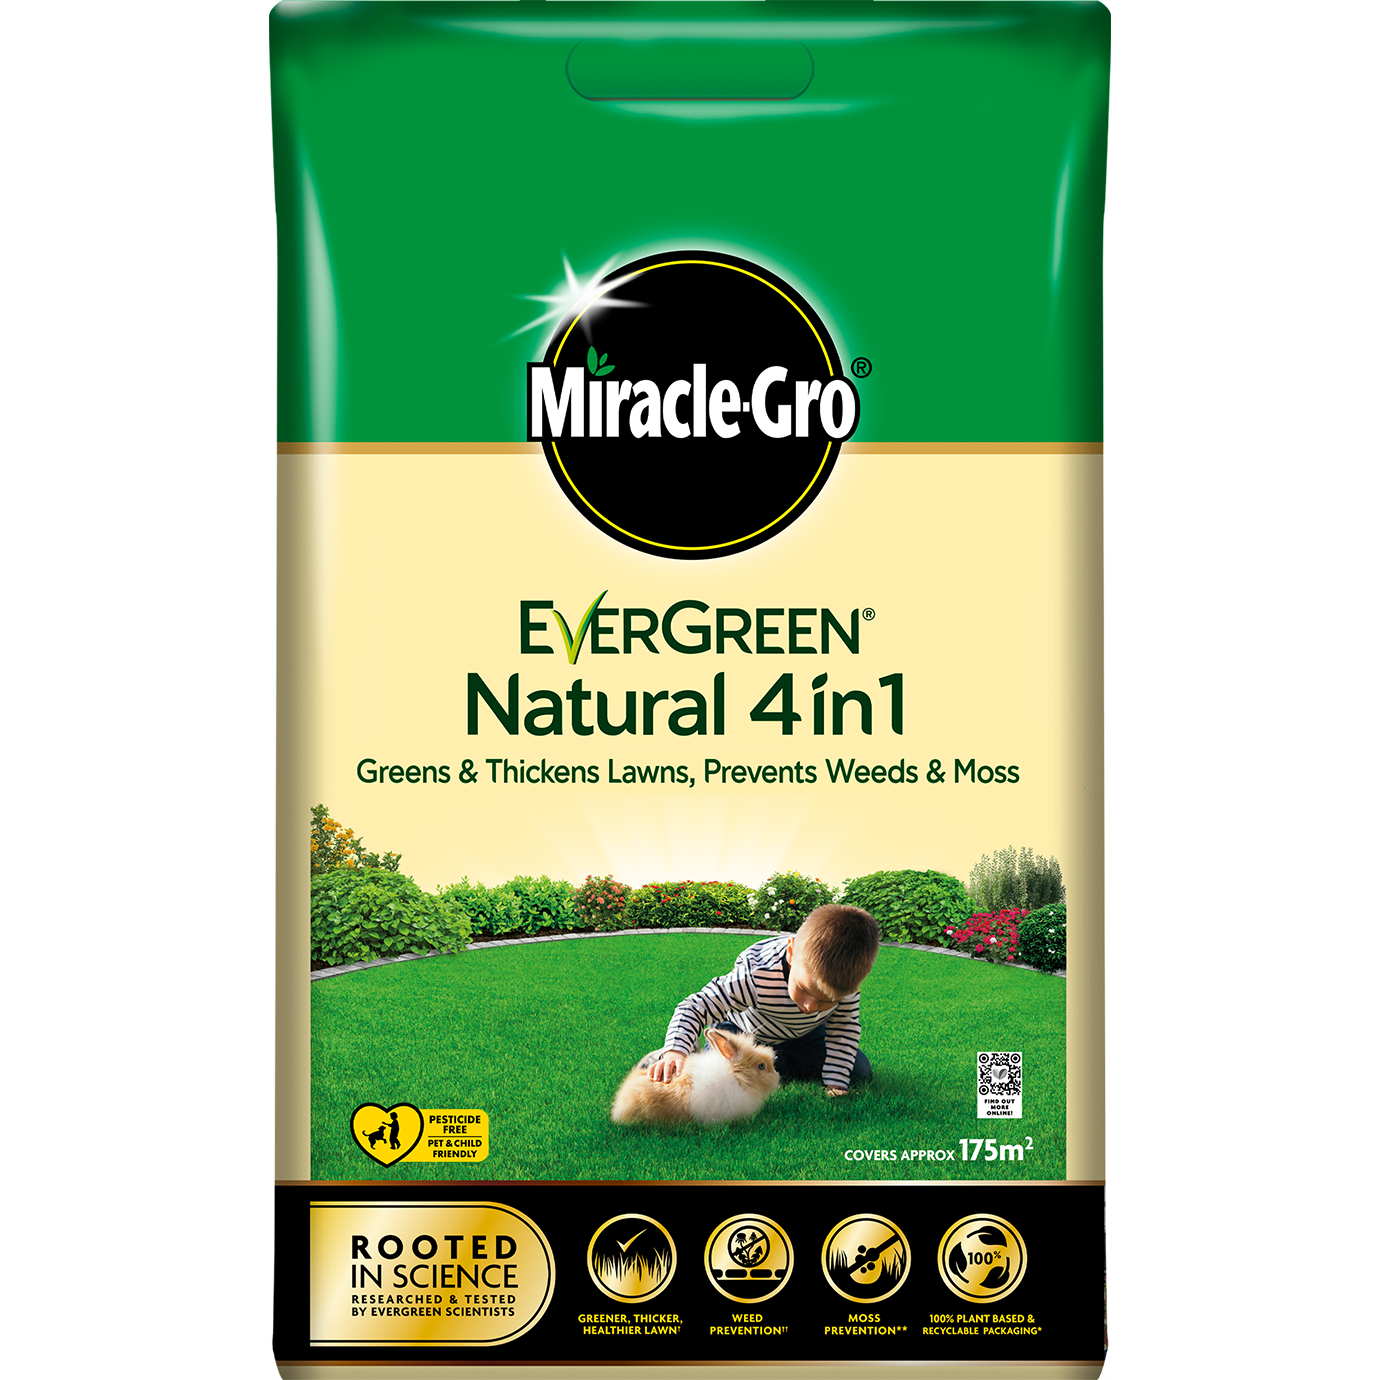 Image of Miracle-Gro Lawn Food Granules free to use image